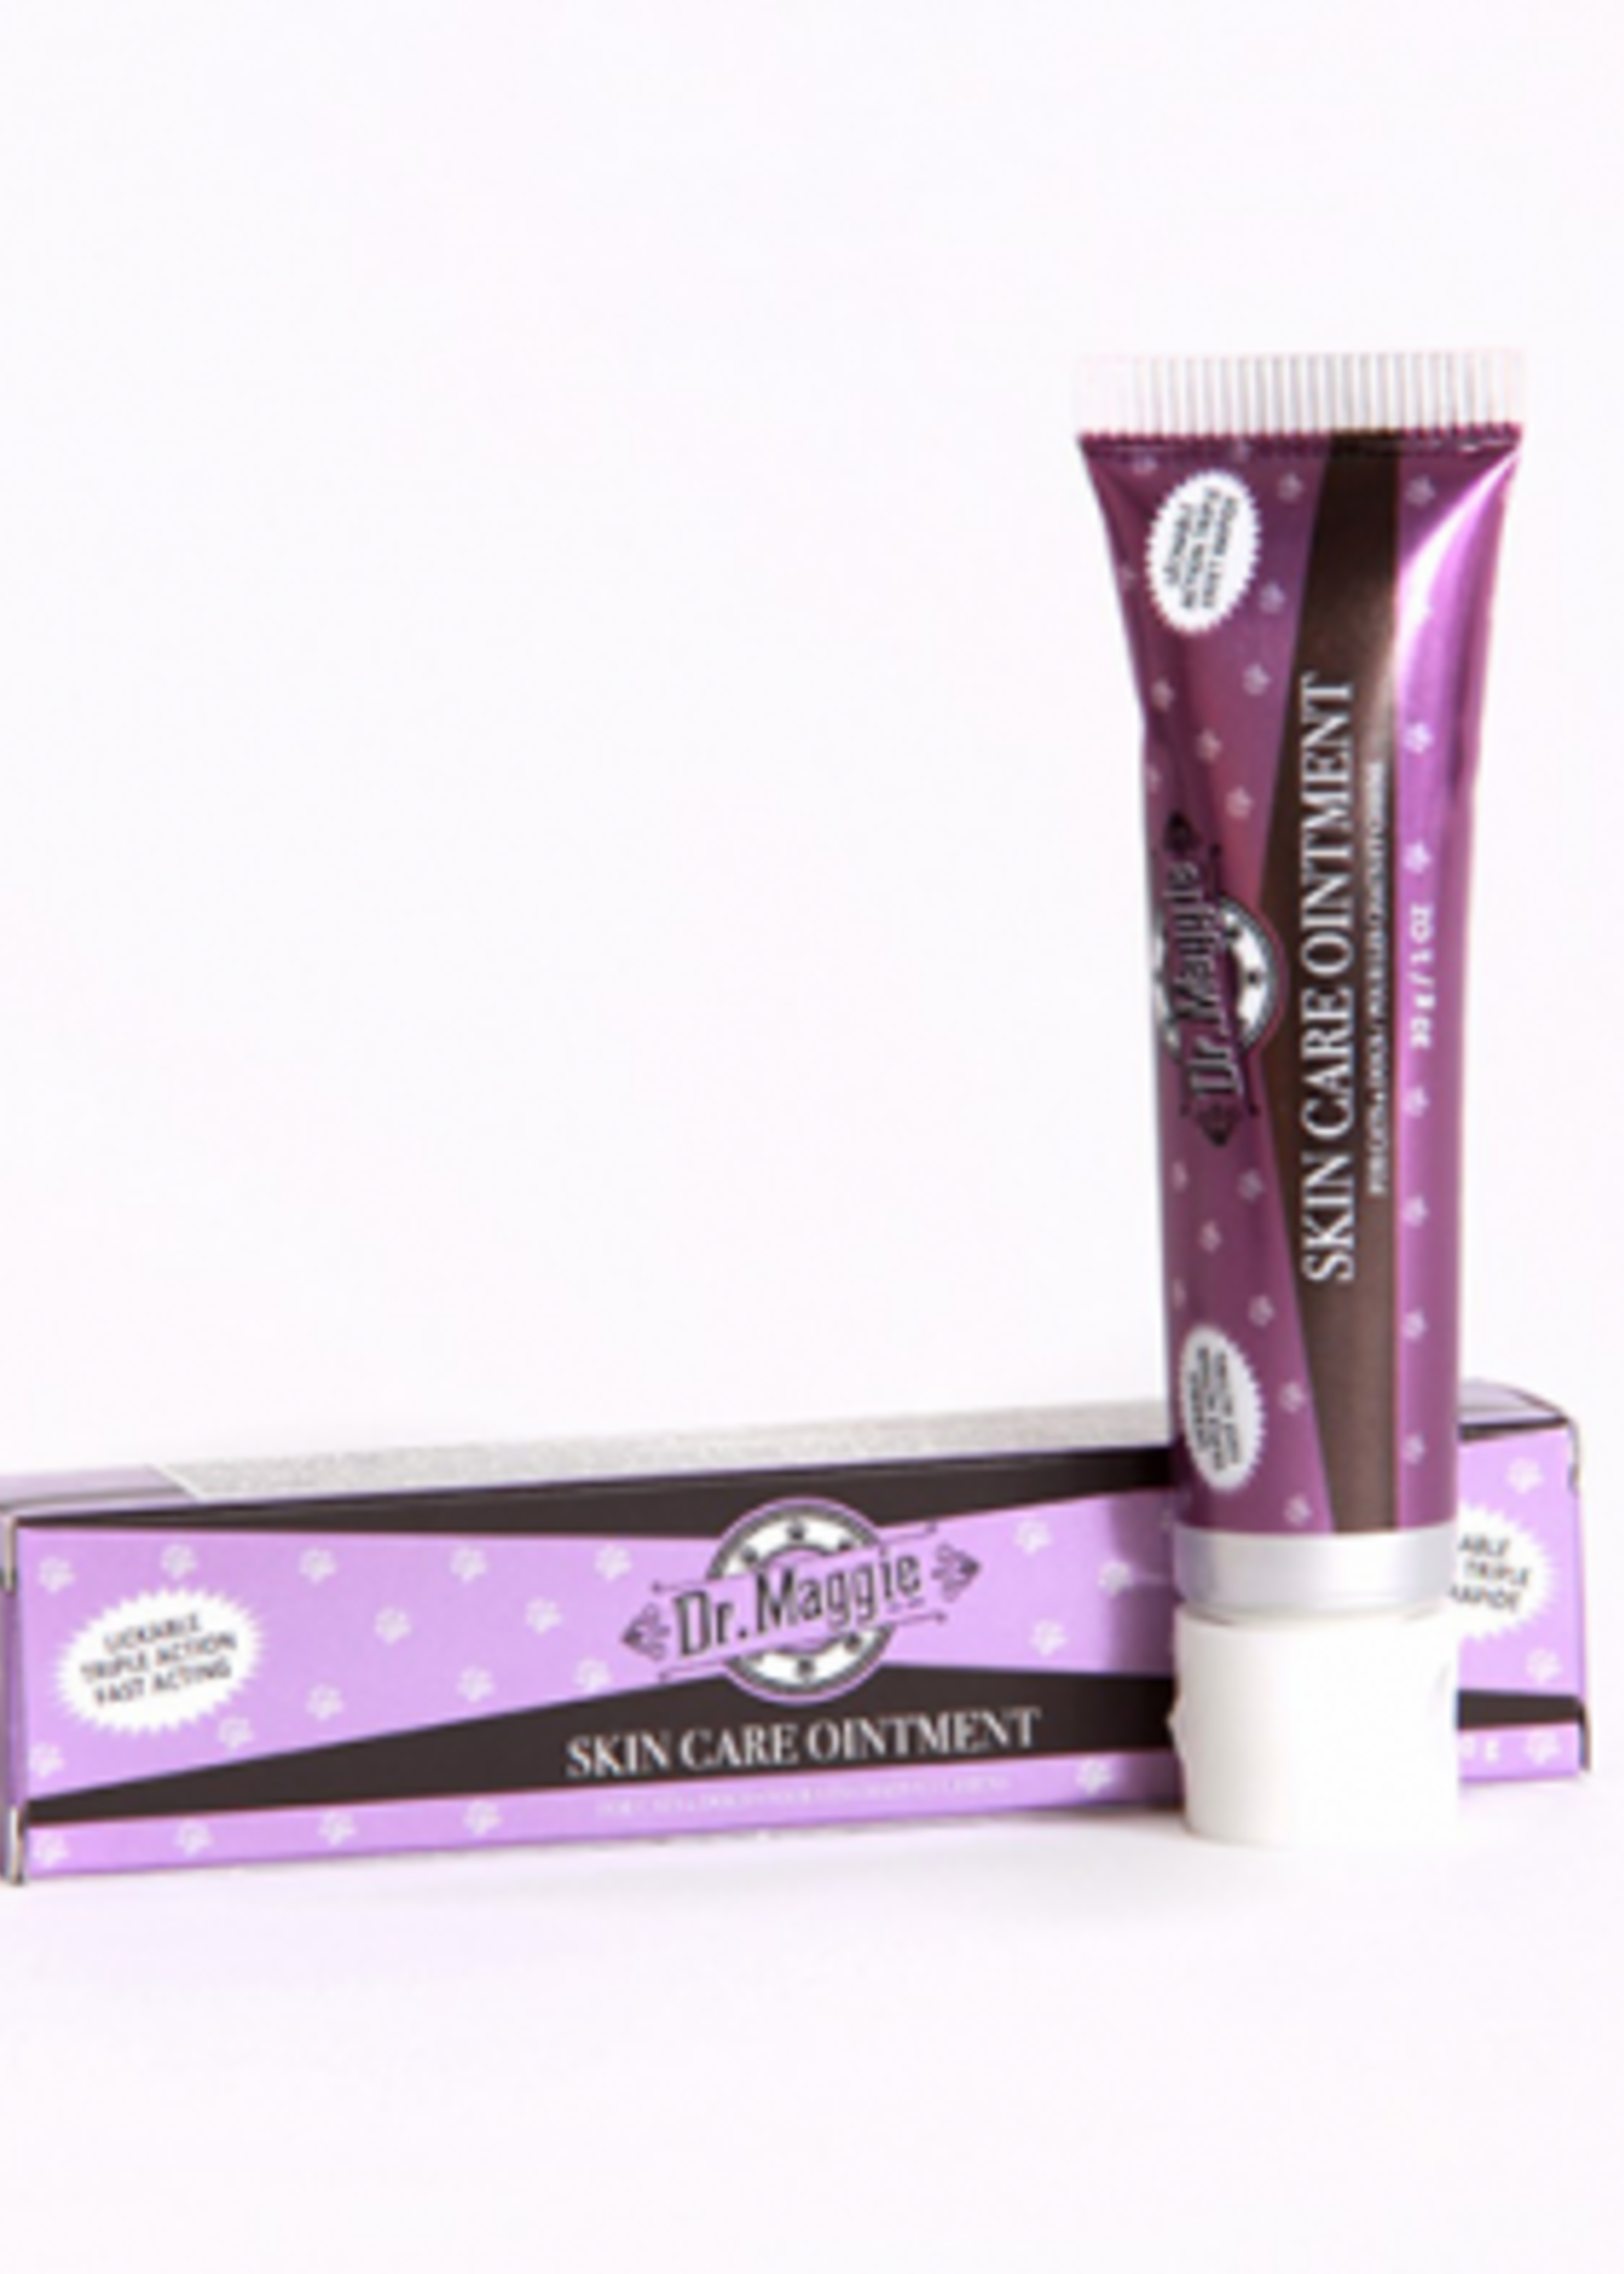 Dr. Maggie Dr. Maggie Skin Care Ointment (for cats and dogs)